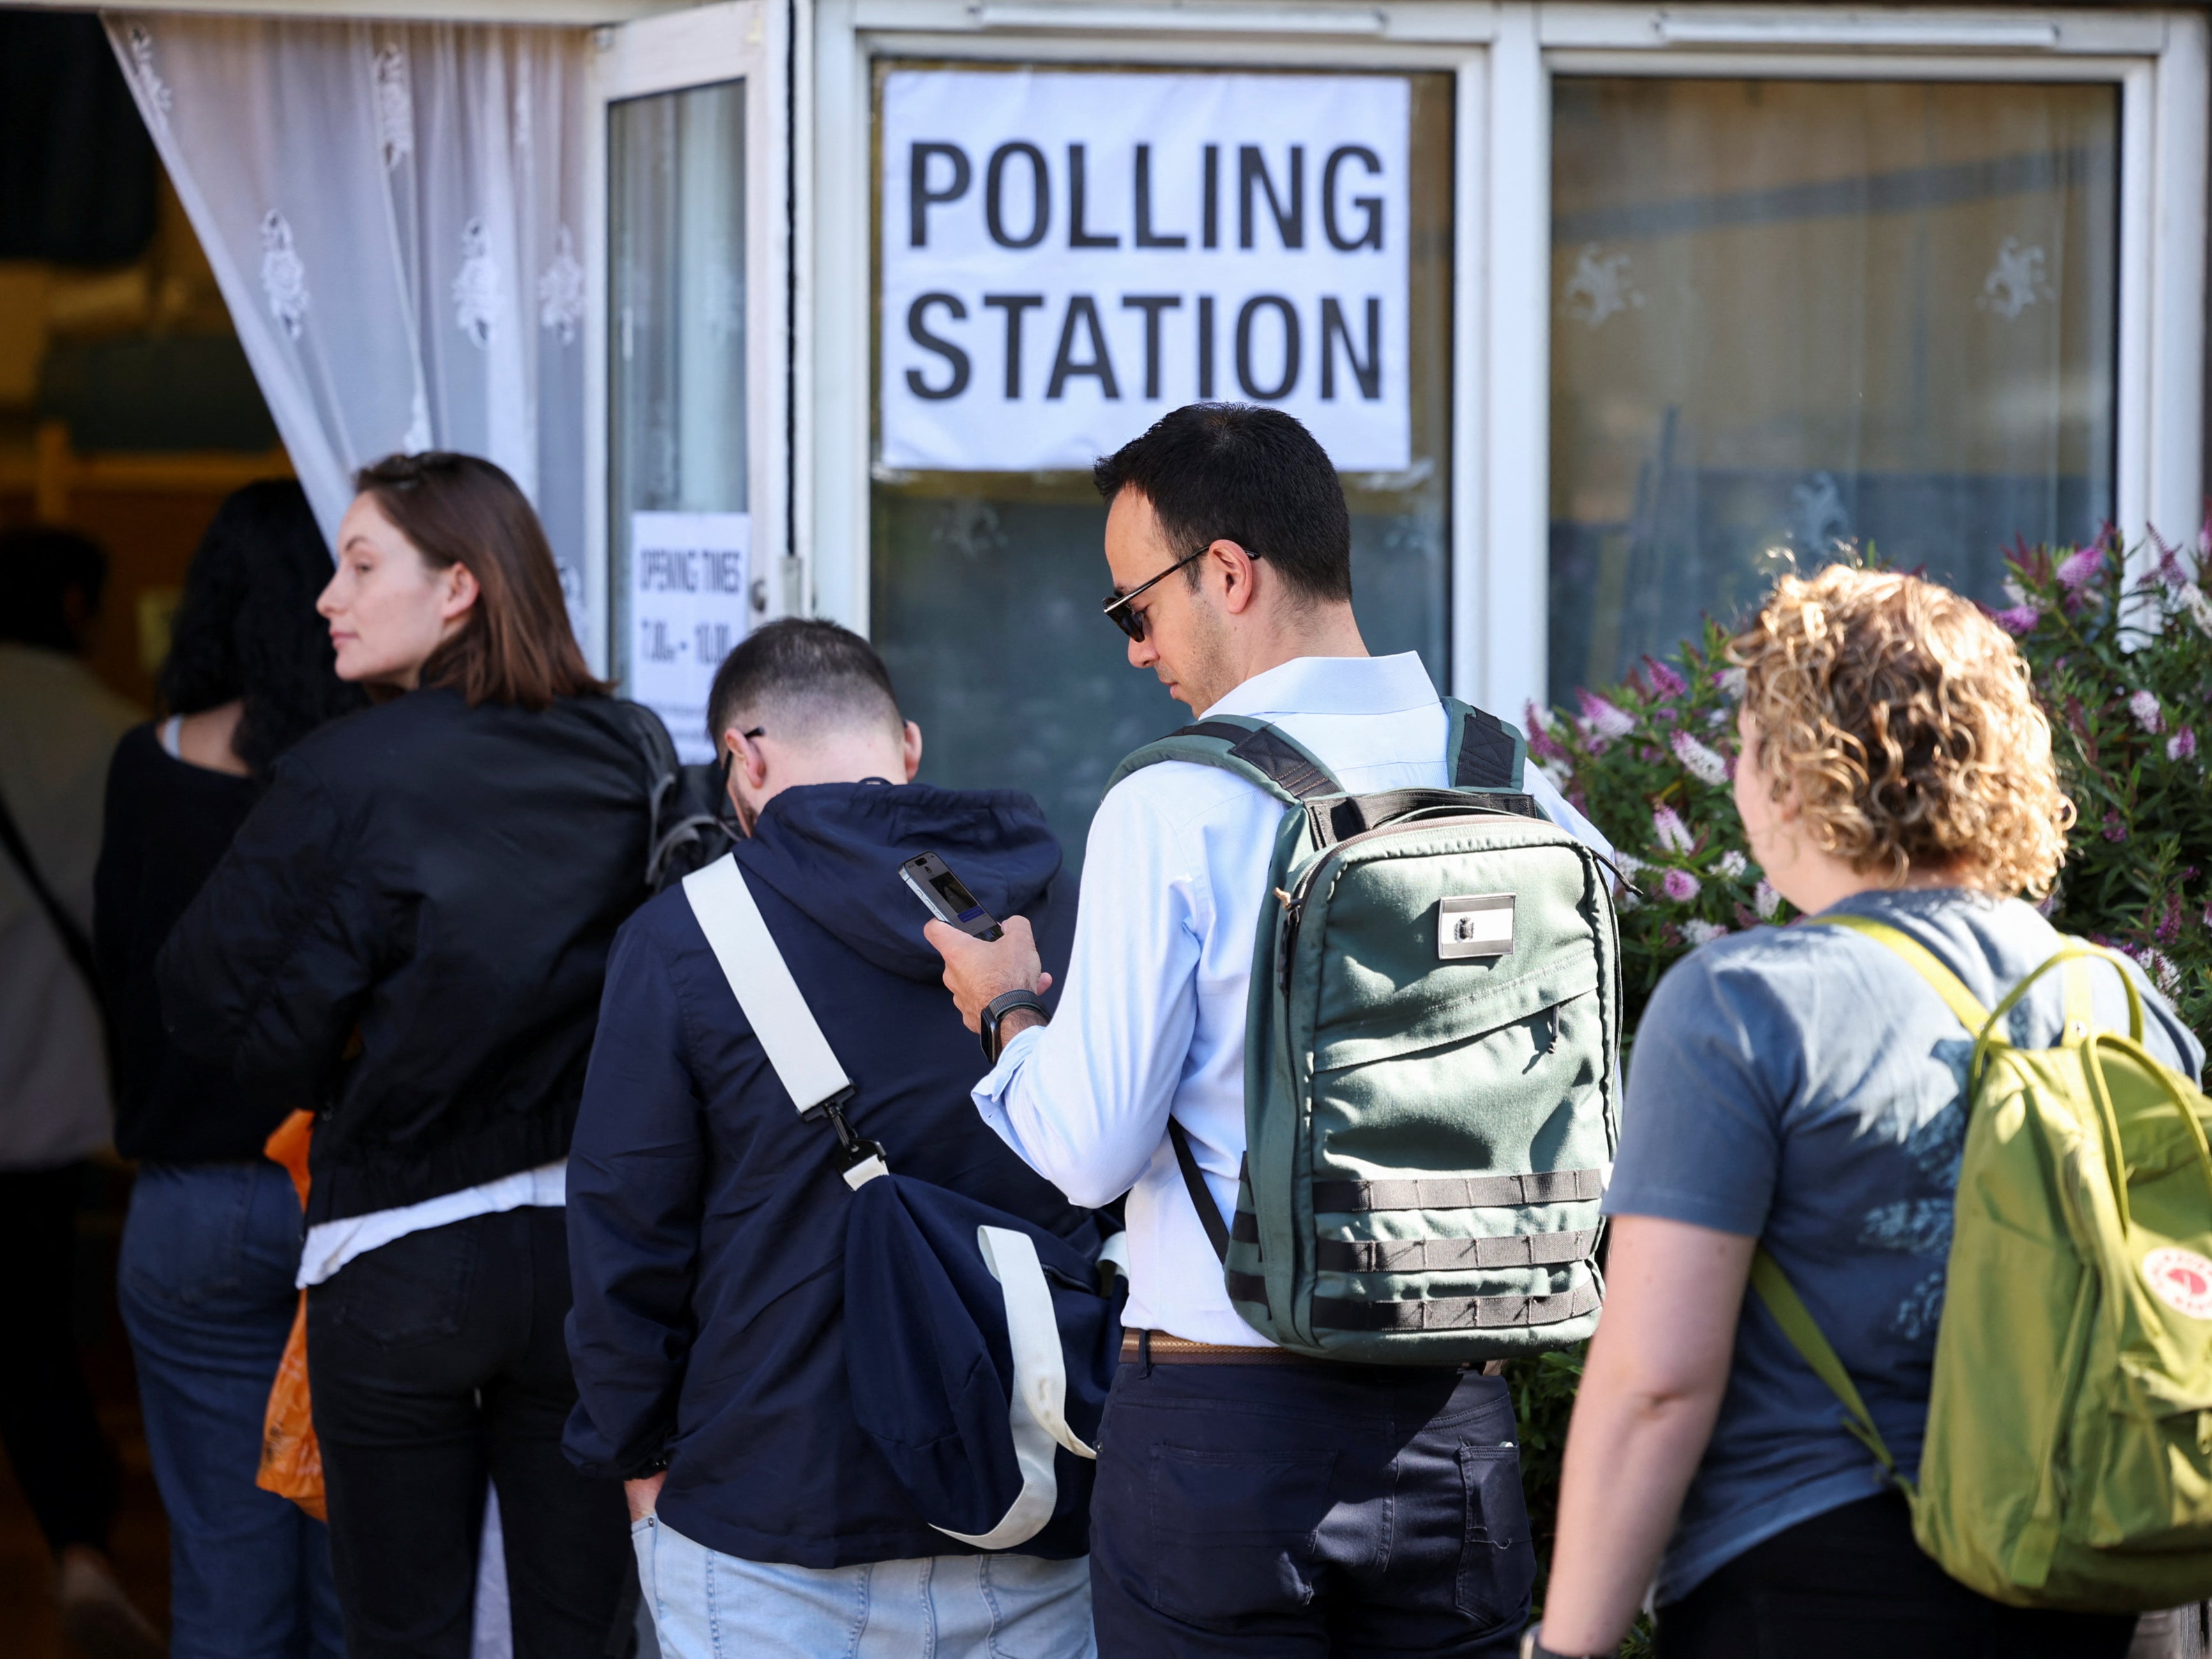 People queuing at vote at a polling station in London